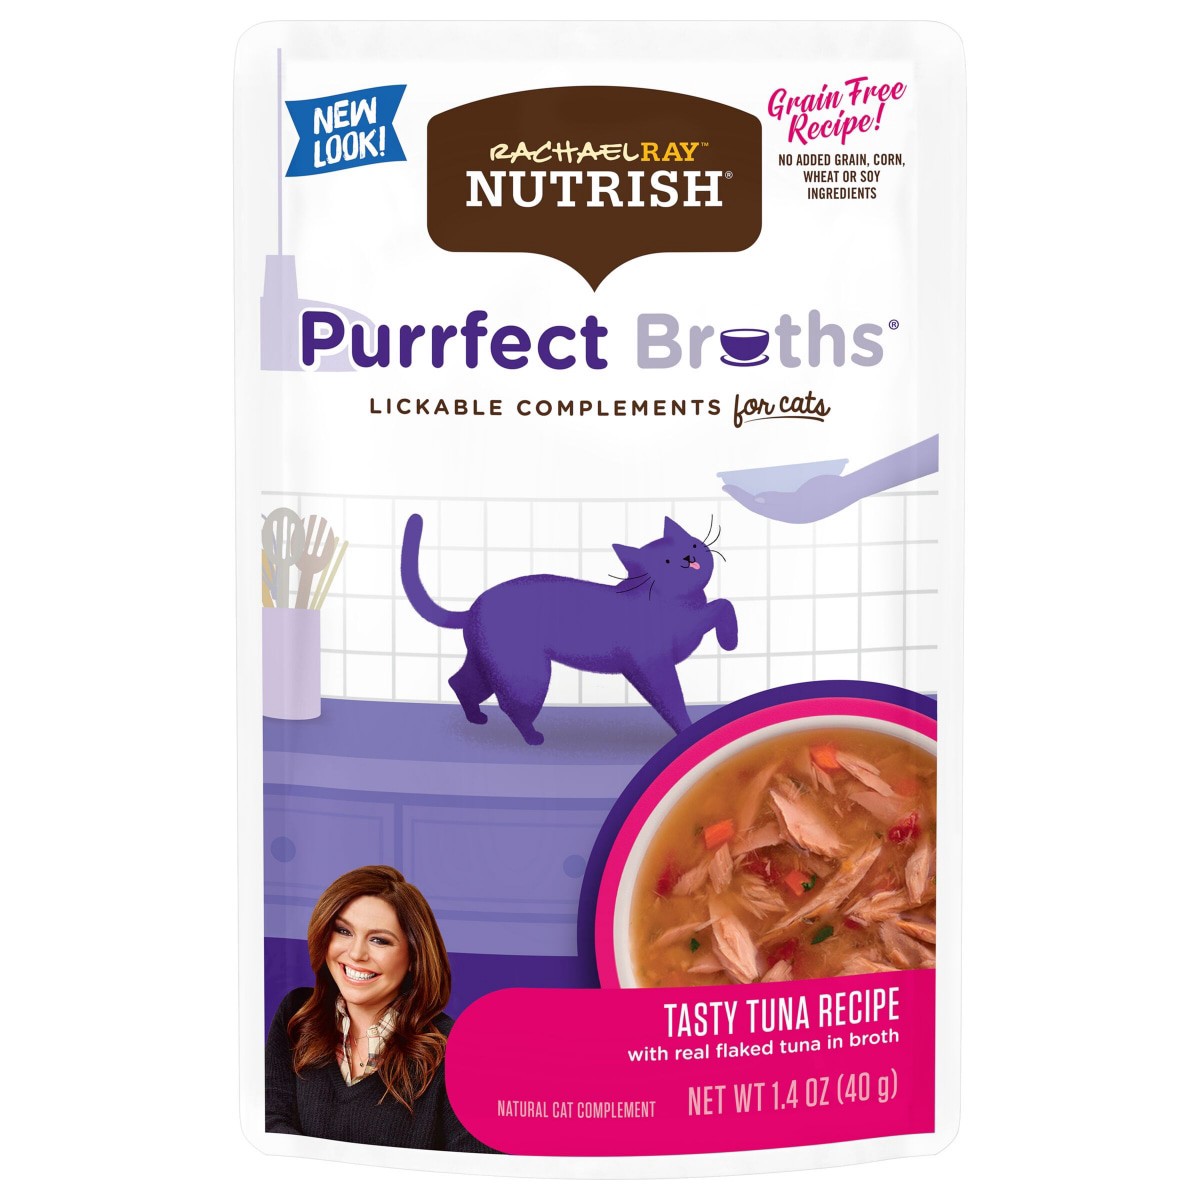 slide 16 of 17, Rachael Ray Nutrish Purrfect Broths All Natural Complement, Grain Free Tasty Tuna Recipe, 1.4 oz